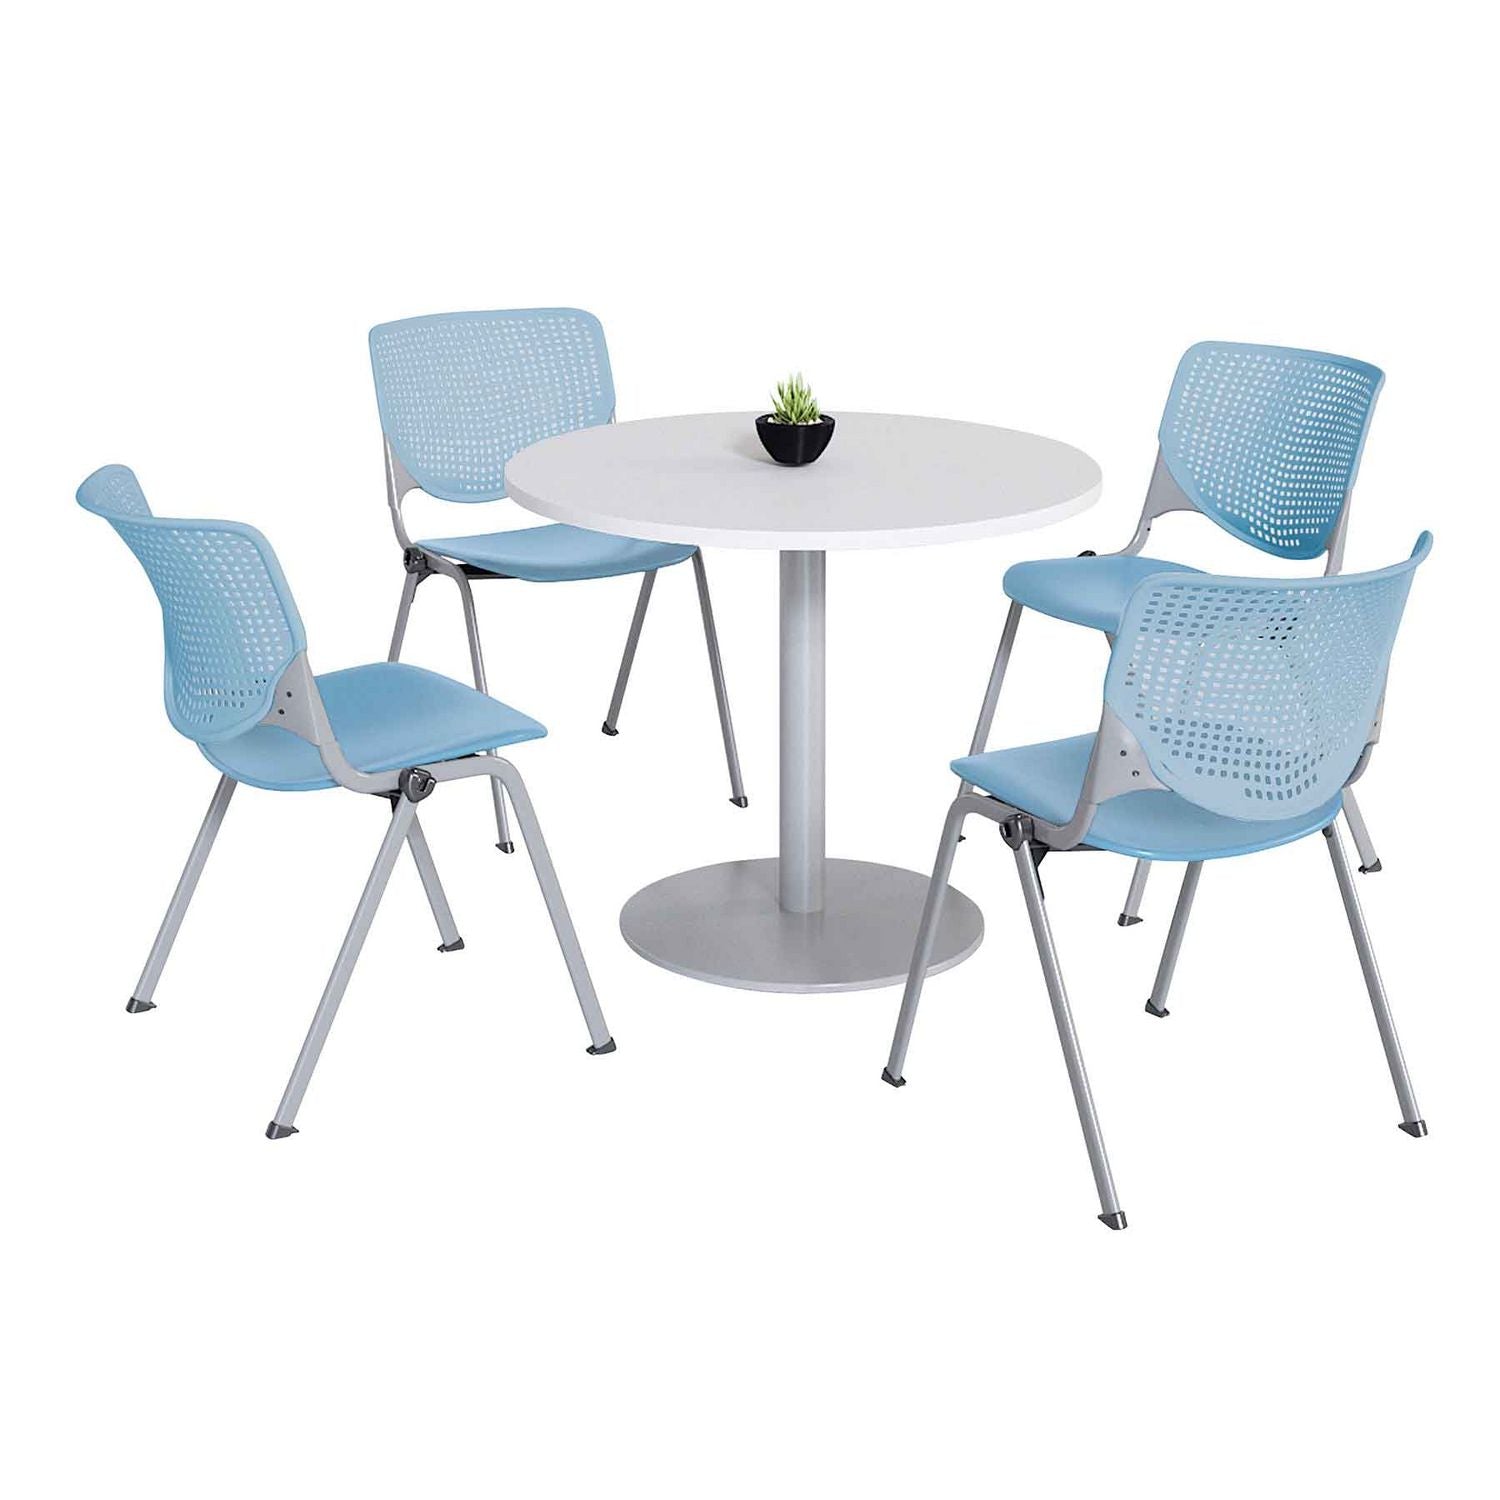 pedestal-table-with-four-sky-blue-kool-series-chairs-round-36-dia-x-29h-designer-white-ships-in-4-6-business-days_kfi811774036757 - 1